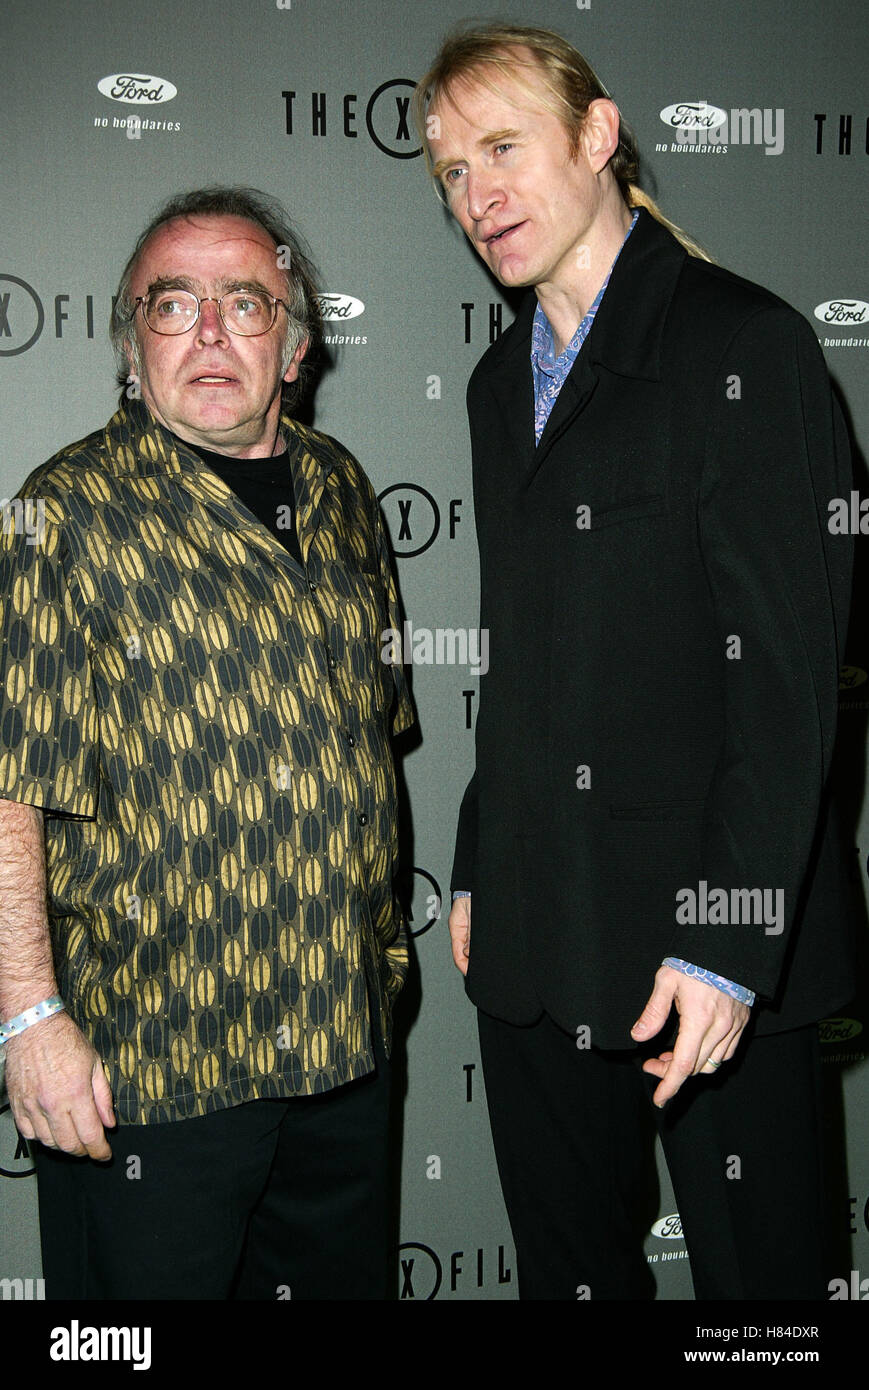 TOM BRAIDWOOD & DEAN HAGLUND X-FILES FINALE WARP PARTY HOUSE OF BLUES HOLLYWOOD LOS ANGELES USA 27 April 2002 Stock Photo